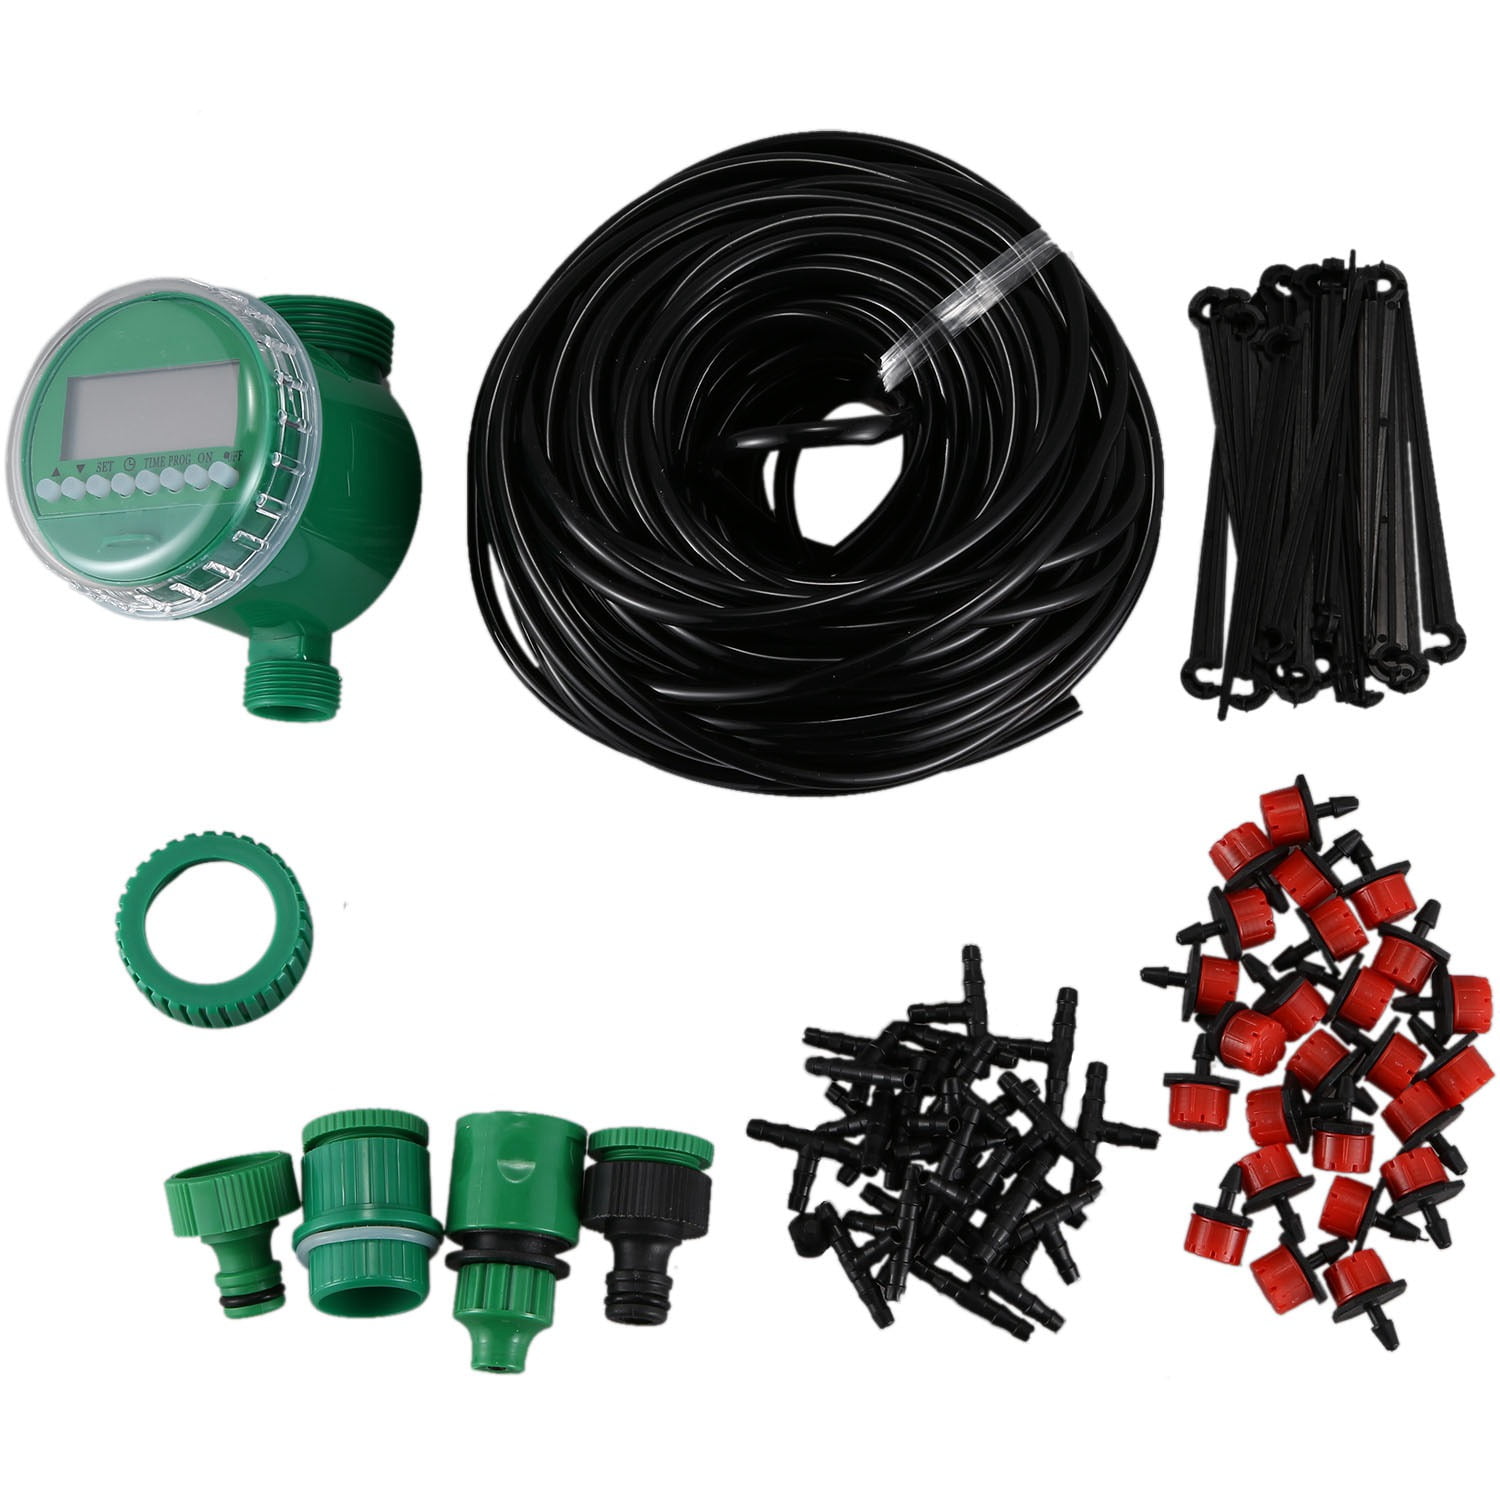 Automatic Drip Irrigation System Kit Plant Timer Self Watering Garden Hose 25M 